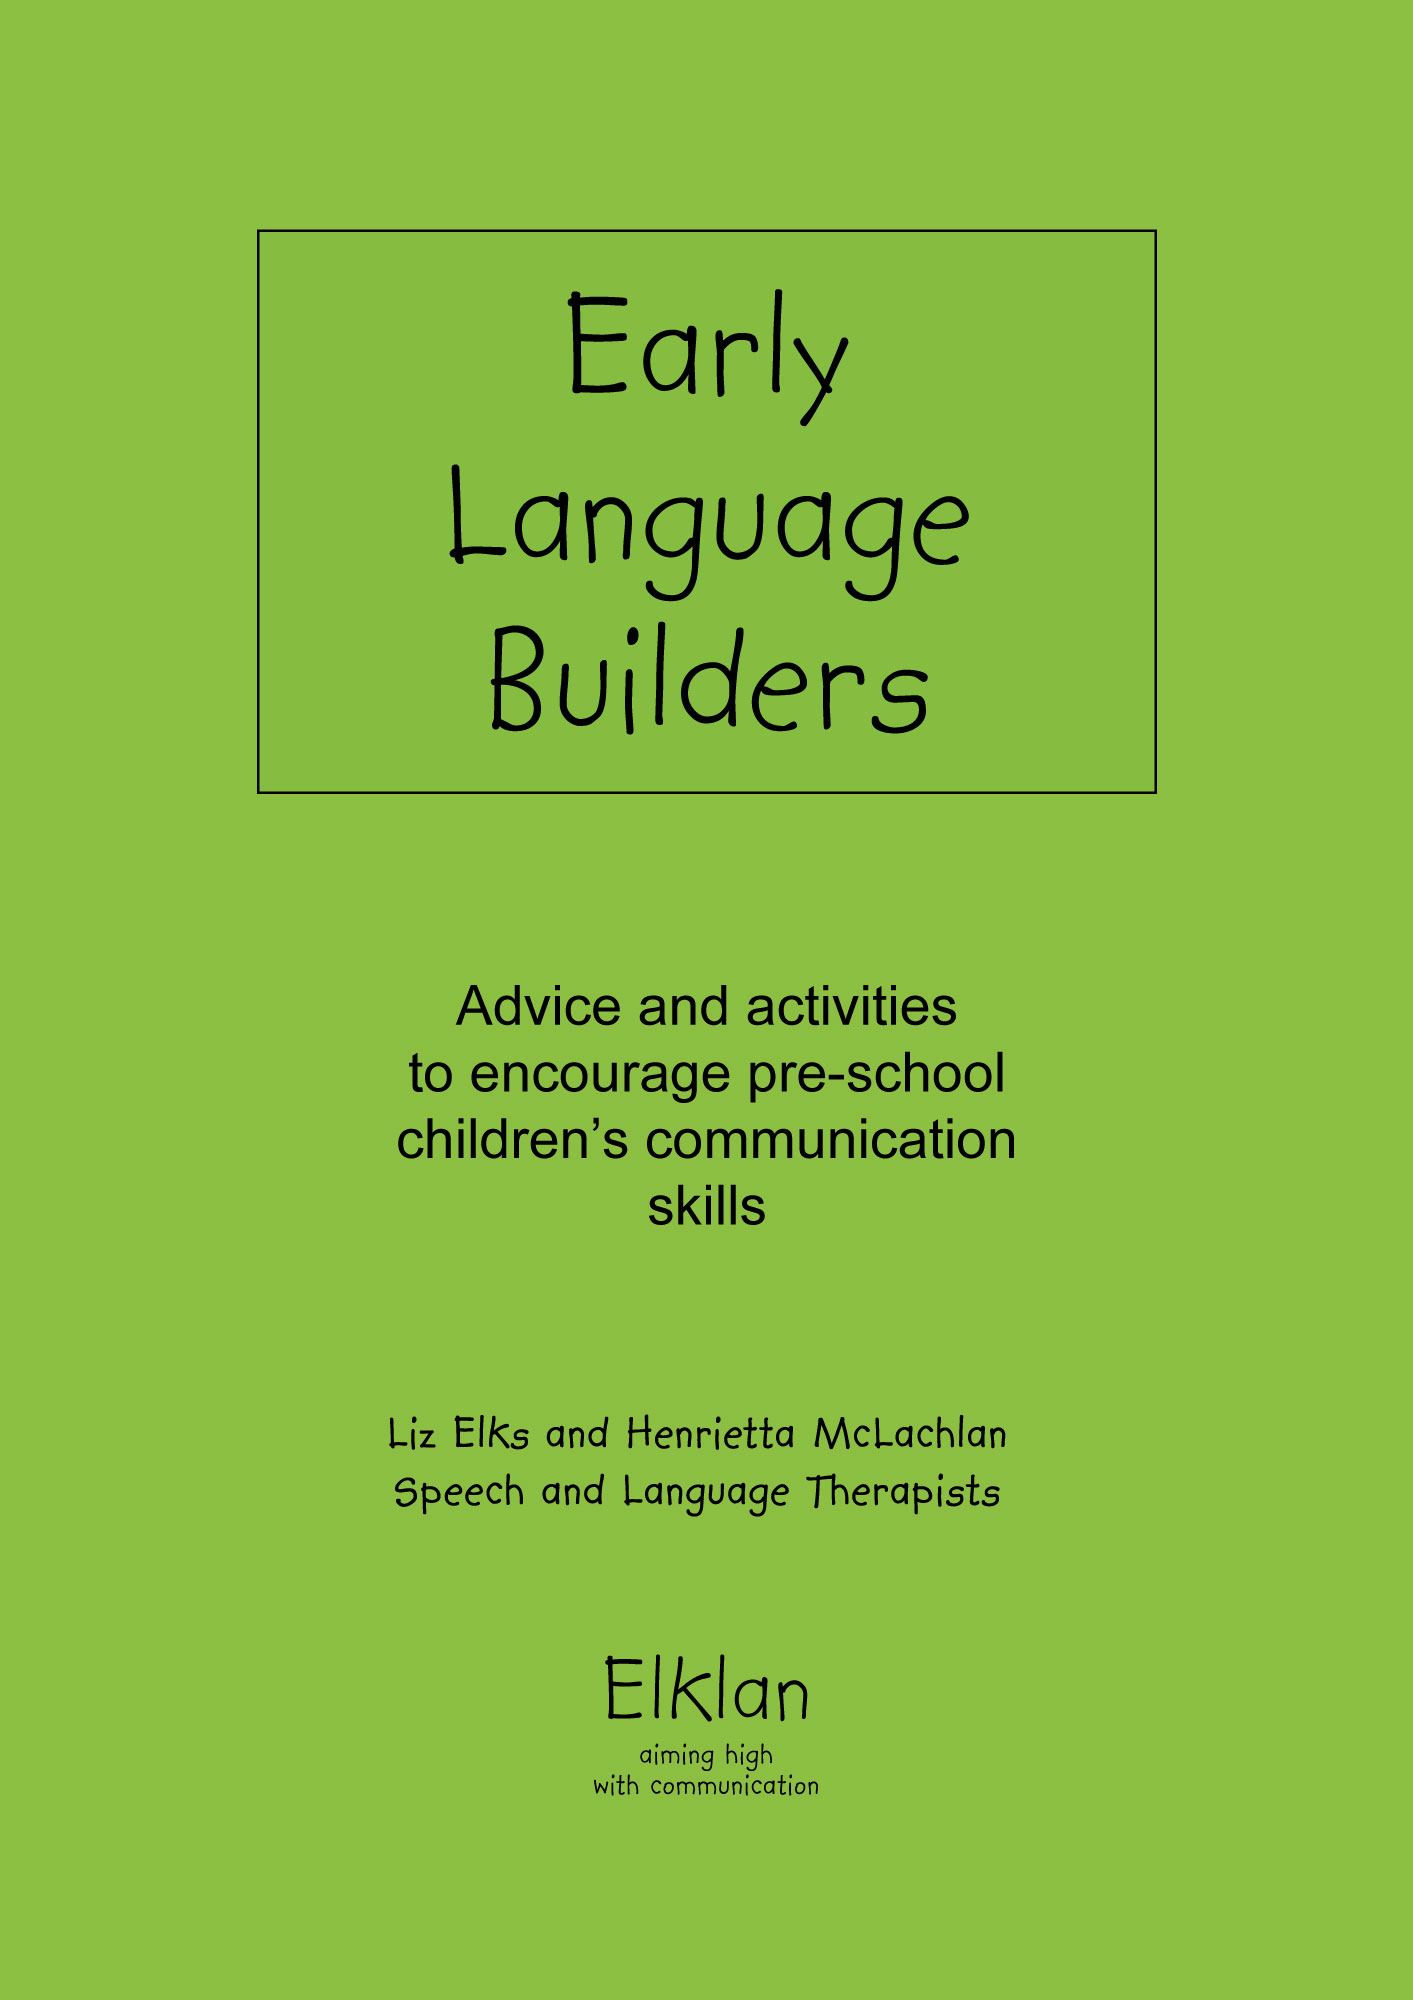 Language Builders for 3-5s paperback - previous (2016) version